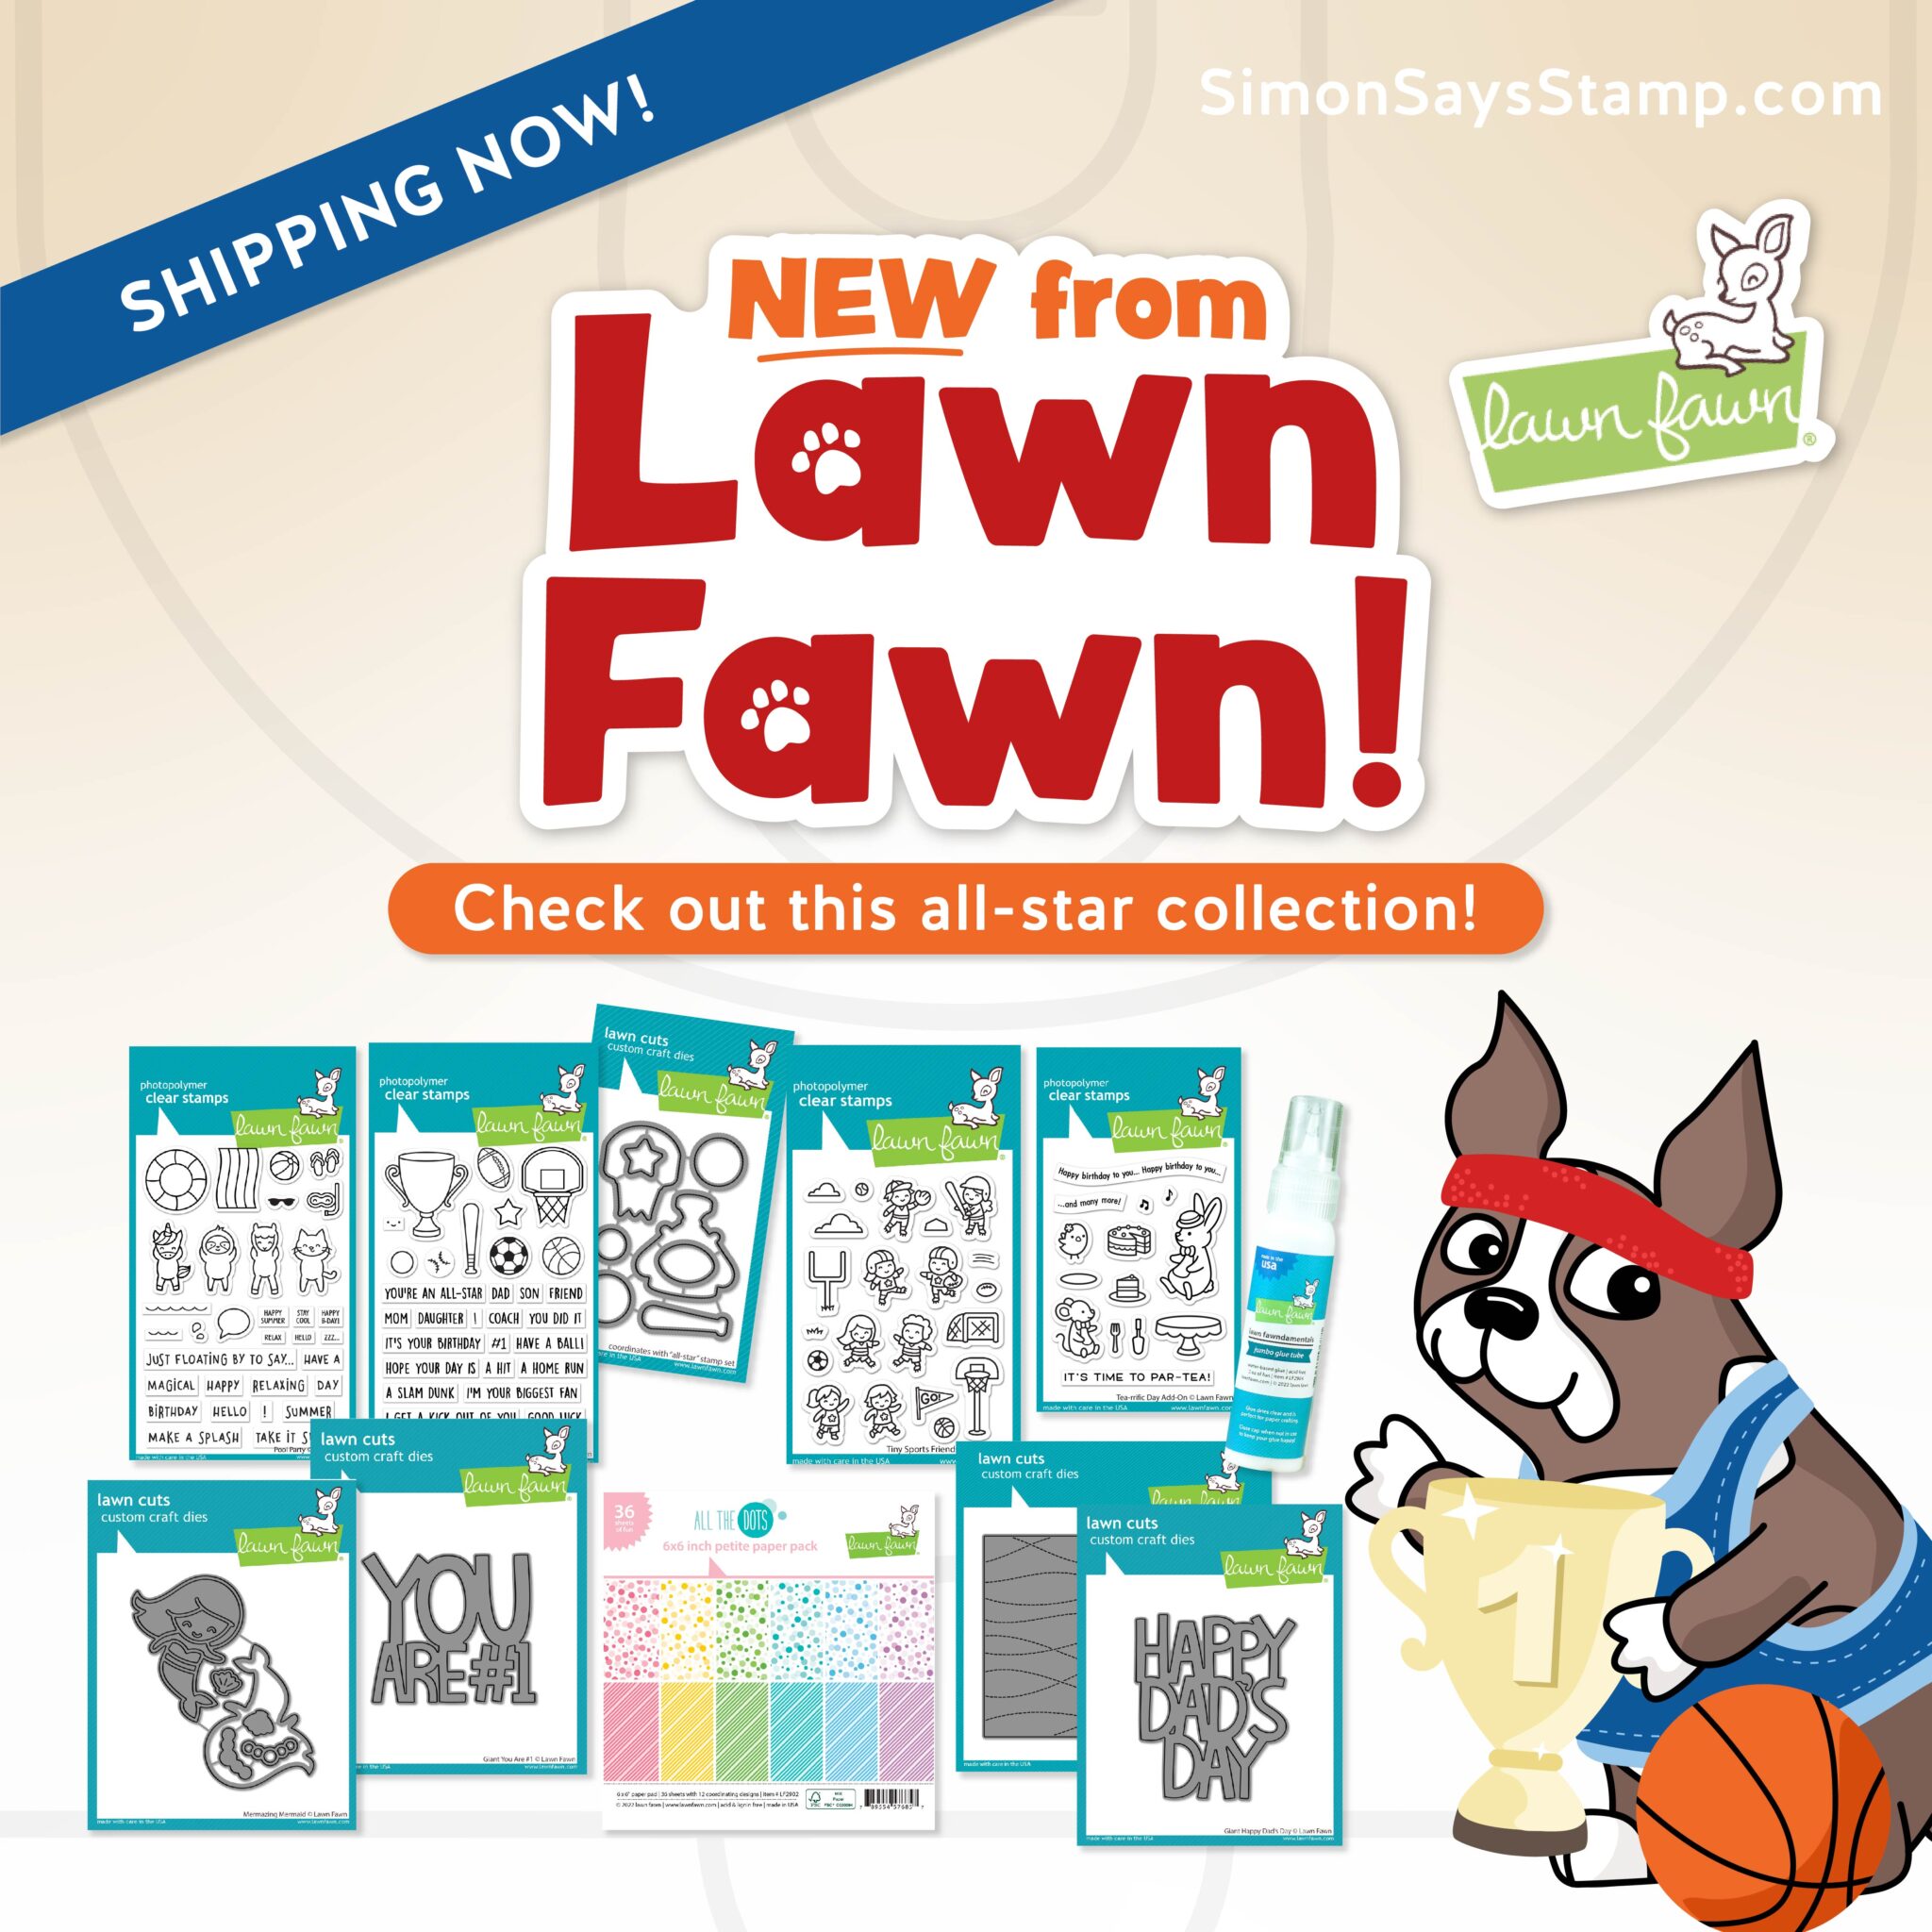 Shipping NOW: New Lawn Fawn!